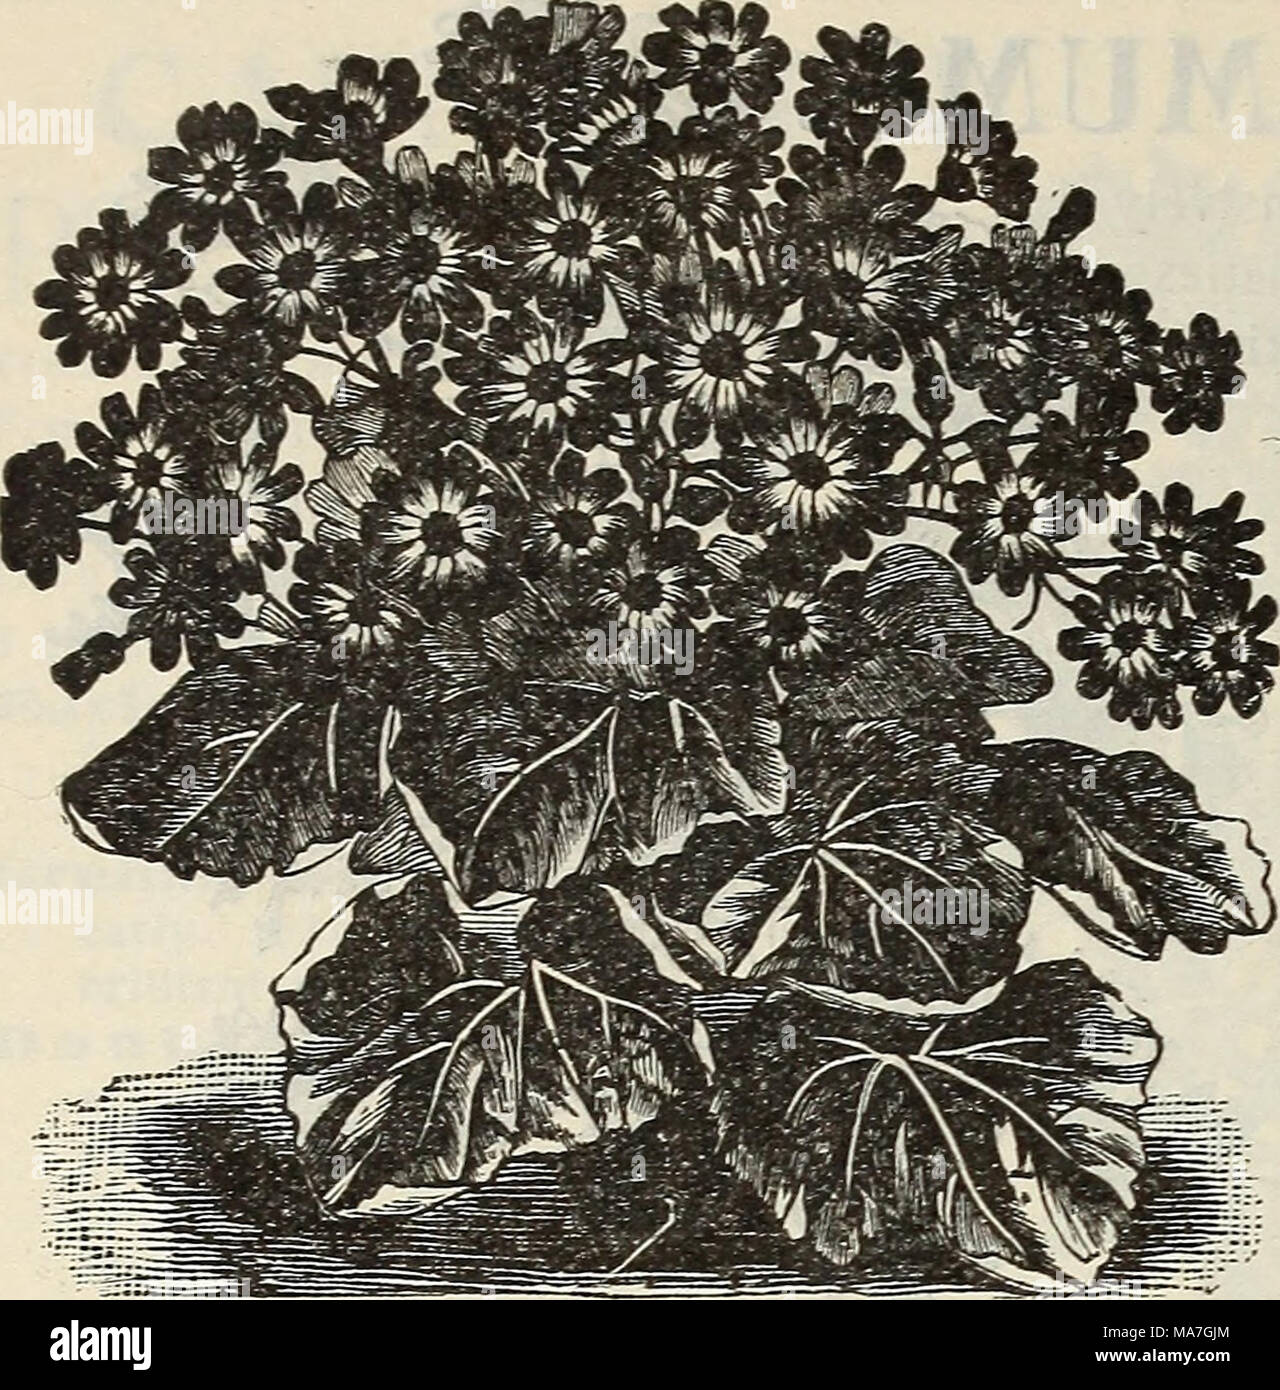 . E. H. Hunt : seedsman . CINERARIA. CLIANTHUS DAMFIERI- OR, &quot;AUSTRALIAN GLORY PEA.&quot; One of the most beautiful plants grown either for the greenhouse or border: the flowers are of scarlet blotched with black, and are borne in clusters; in habit a shrubby trailer; an annual and cannot be transplanted. 10c. COCCINEA INDICA. A pretty climber with bright luxuriant, ivy-like foliage; flowers are small, white, bell shaped, followed by fruits 2 inches long, which turn to scarlet, spotted with white. 10c. CONVOLVULUS; OR, MORNING GLORY. The well-known climbing and bedding plants, unexcelled  Stock Photo